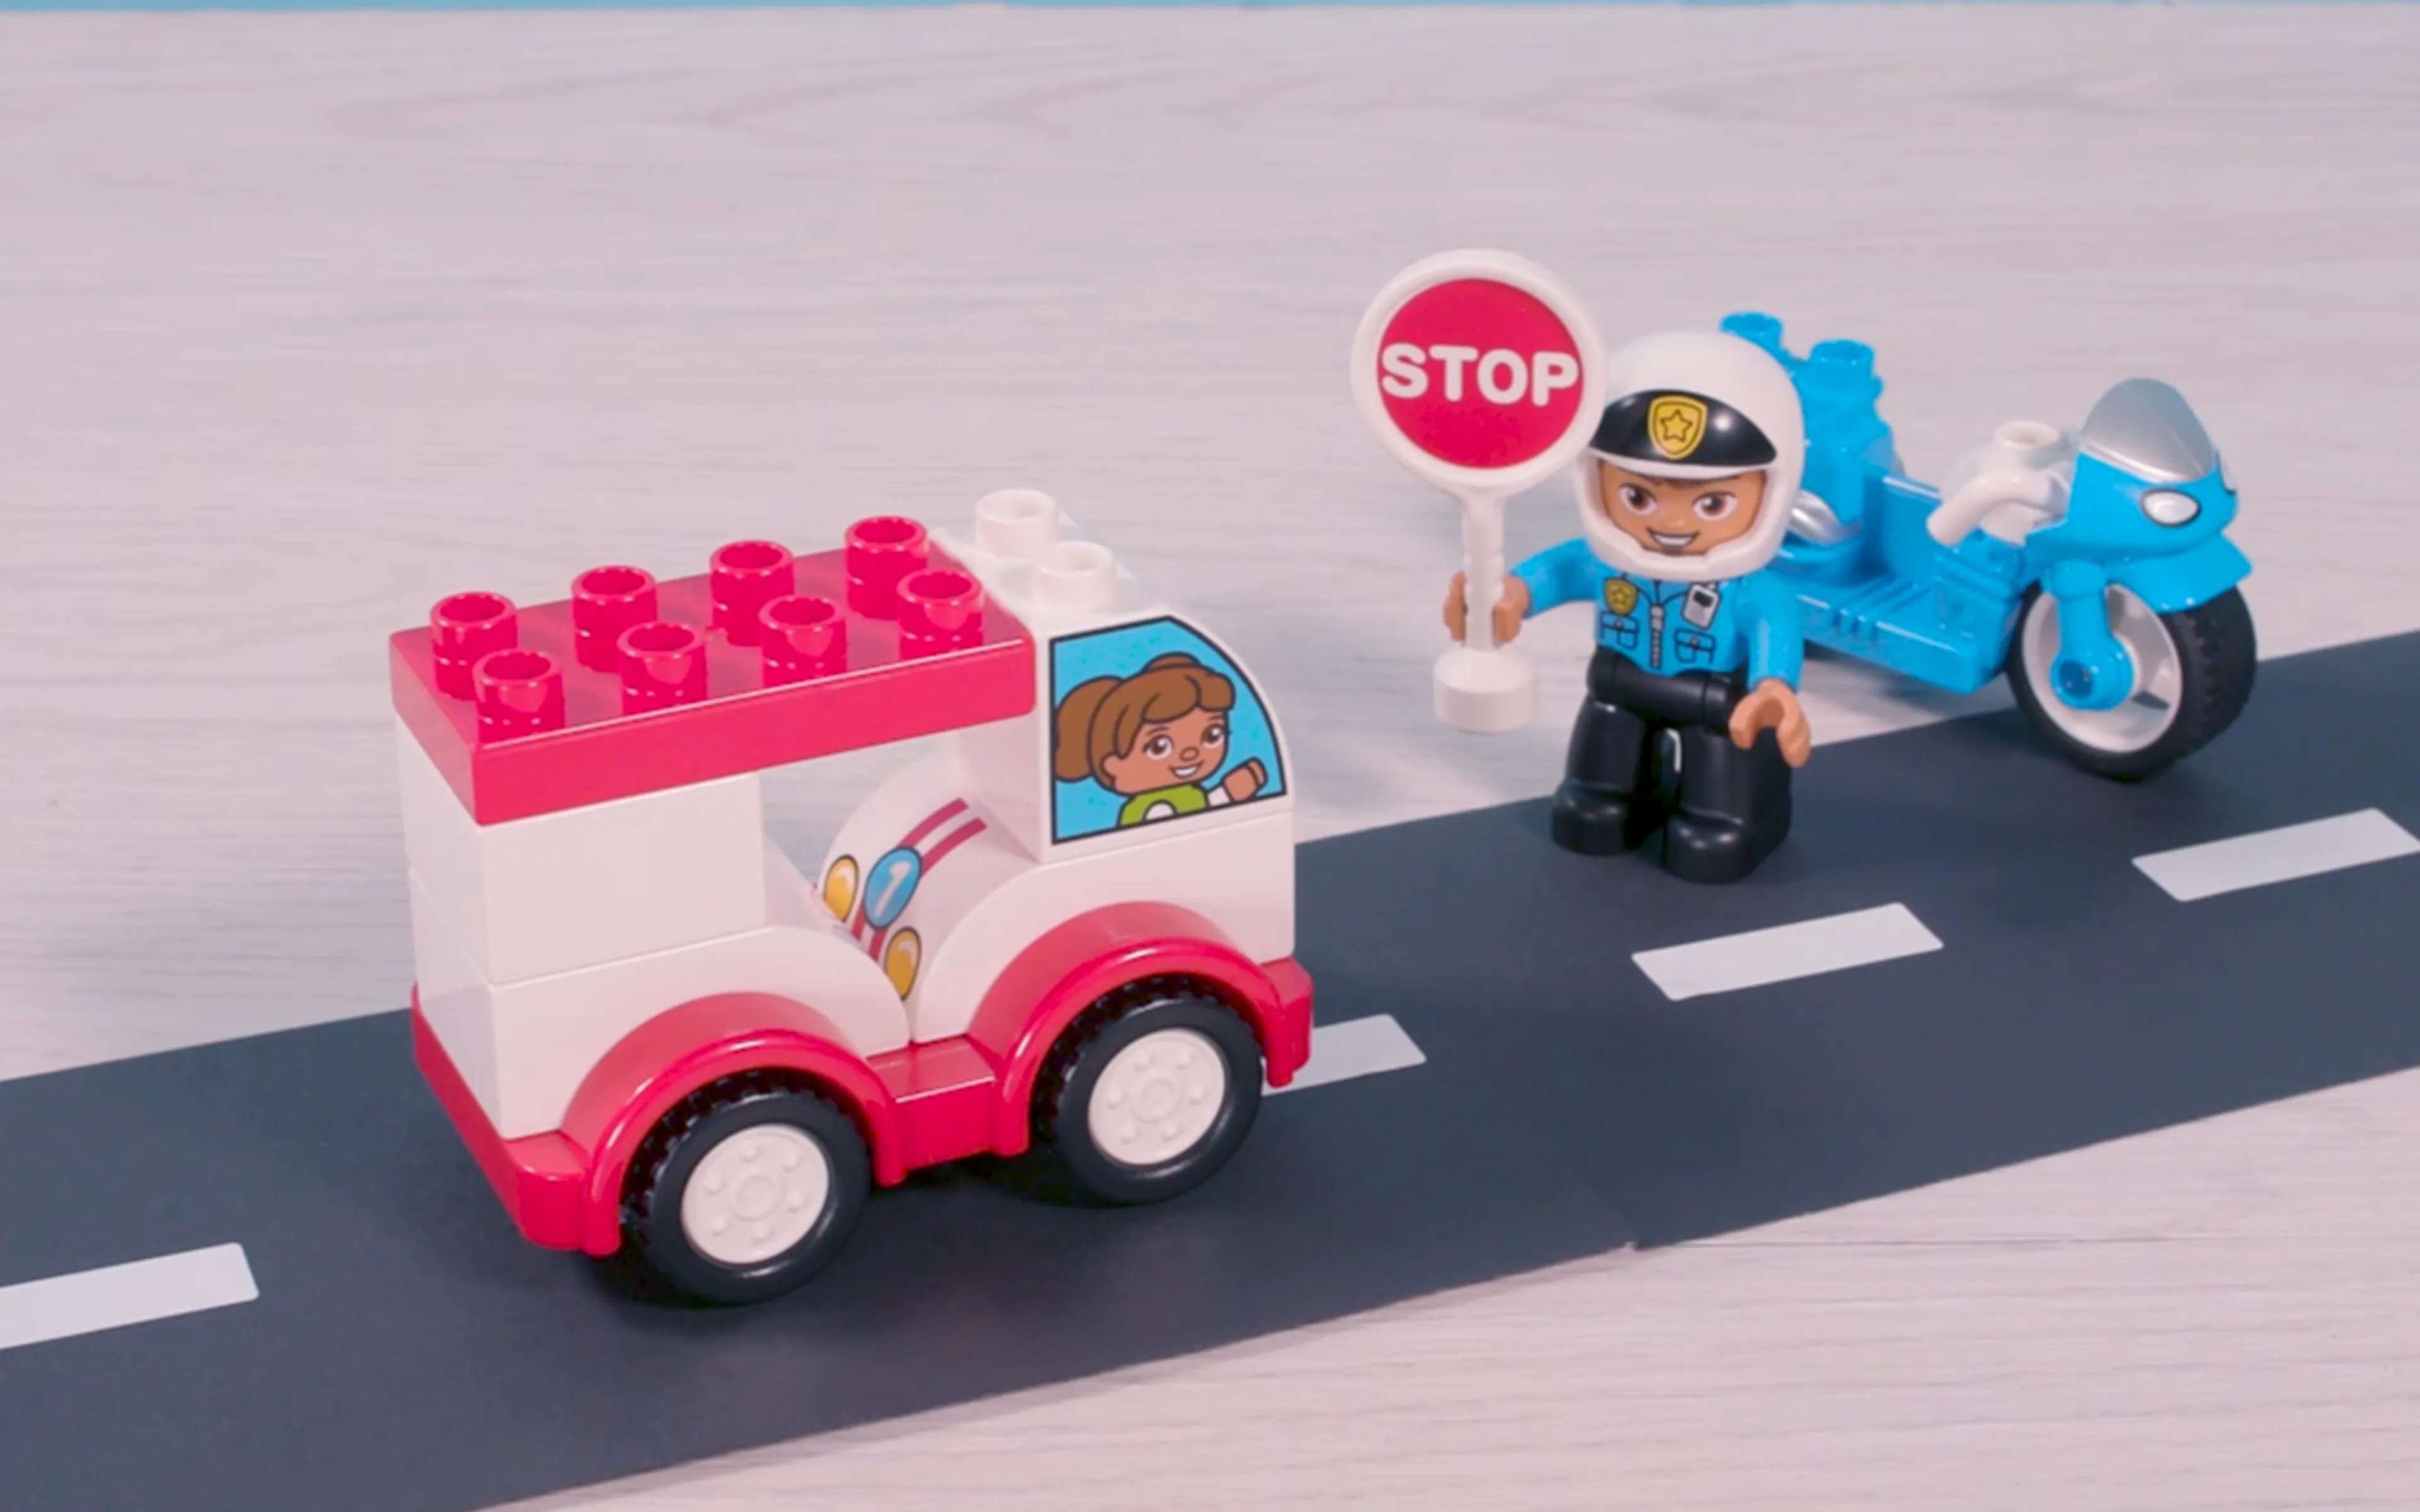 An image of a LEGO DUPLO police officer holding a stop sign